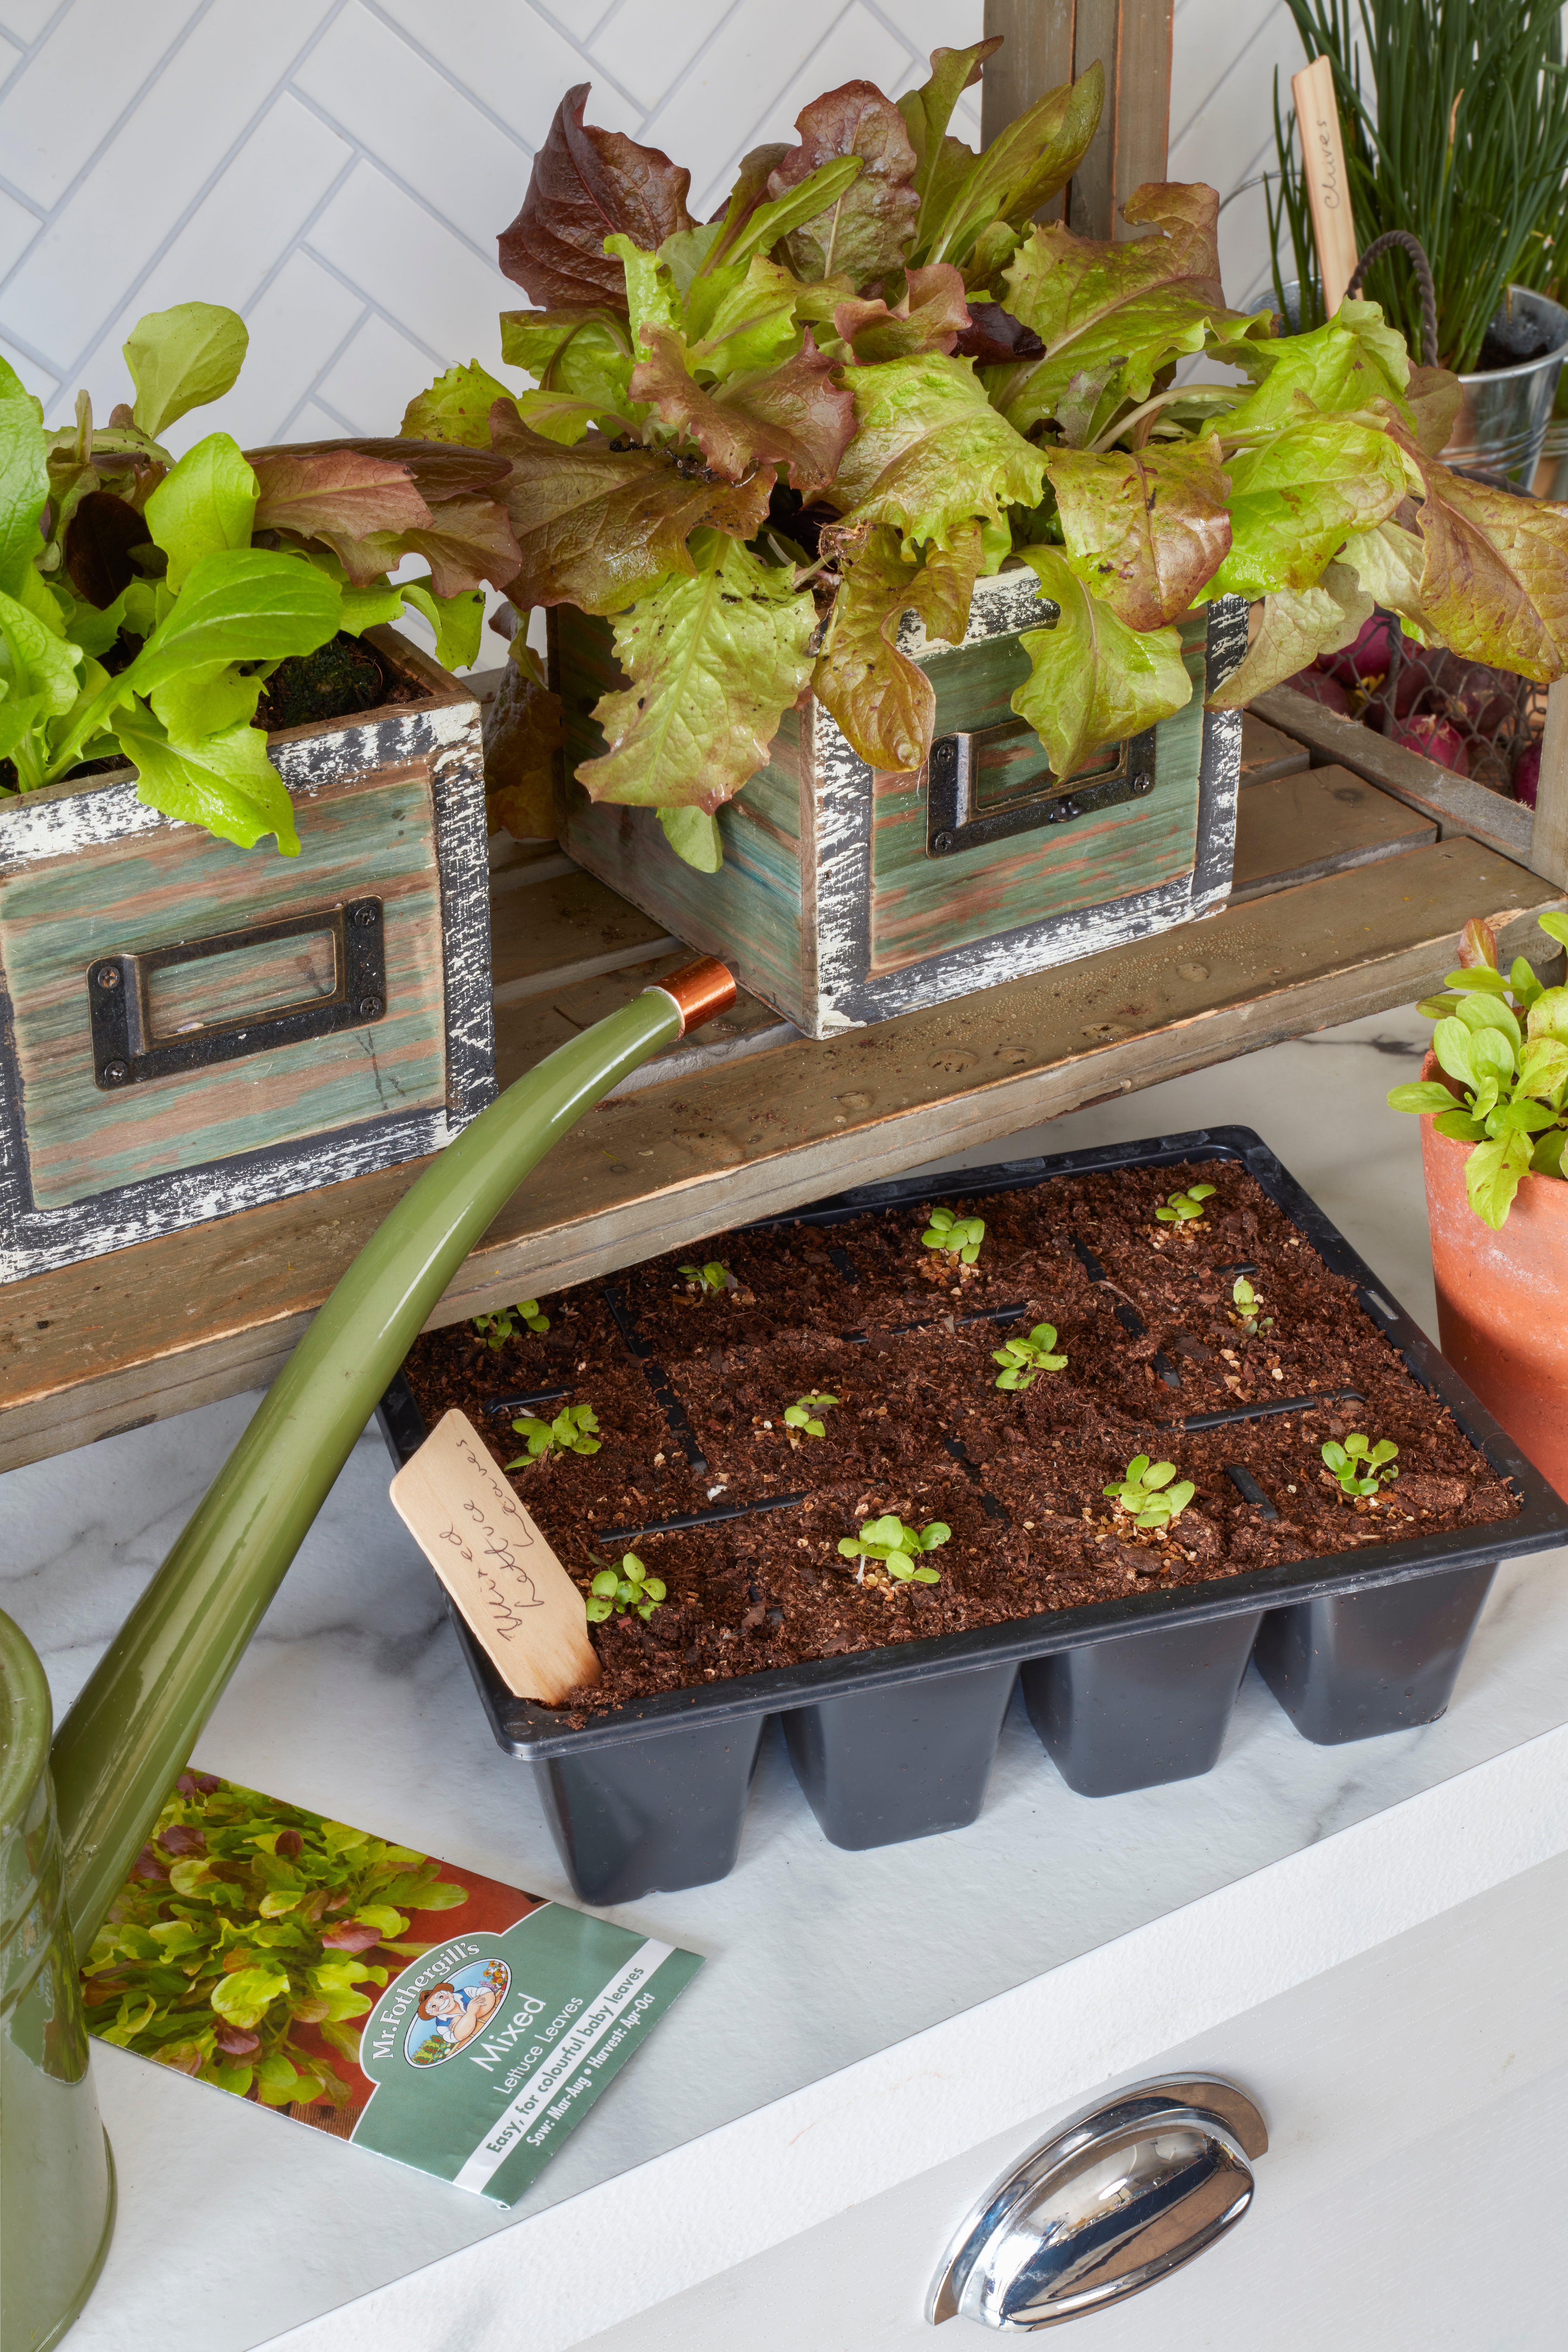 “Gardening and growing your own from seed can be super rewarding and great for your wellbeing”